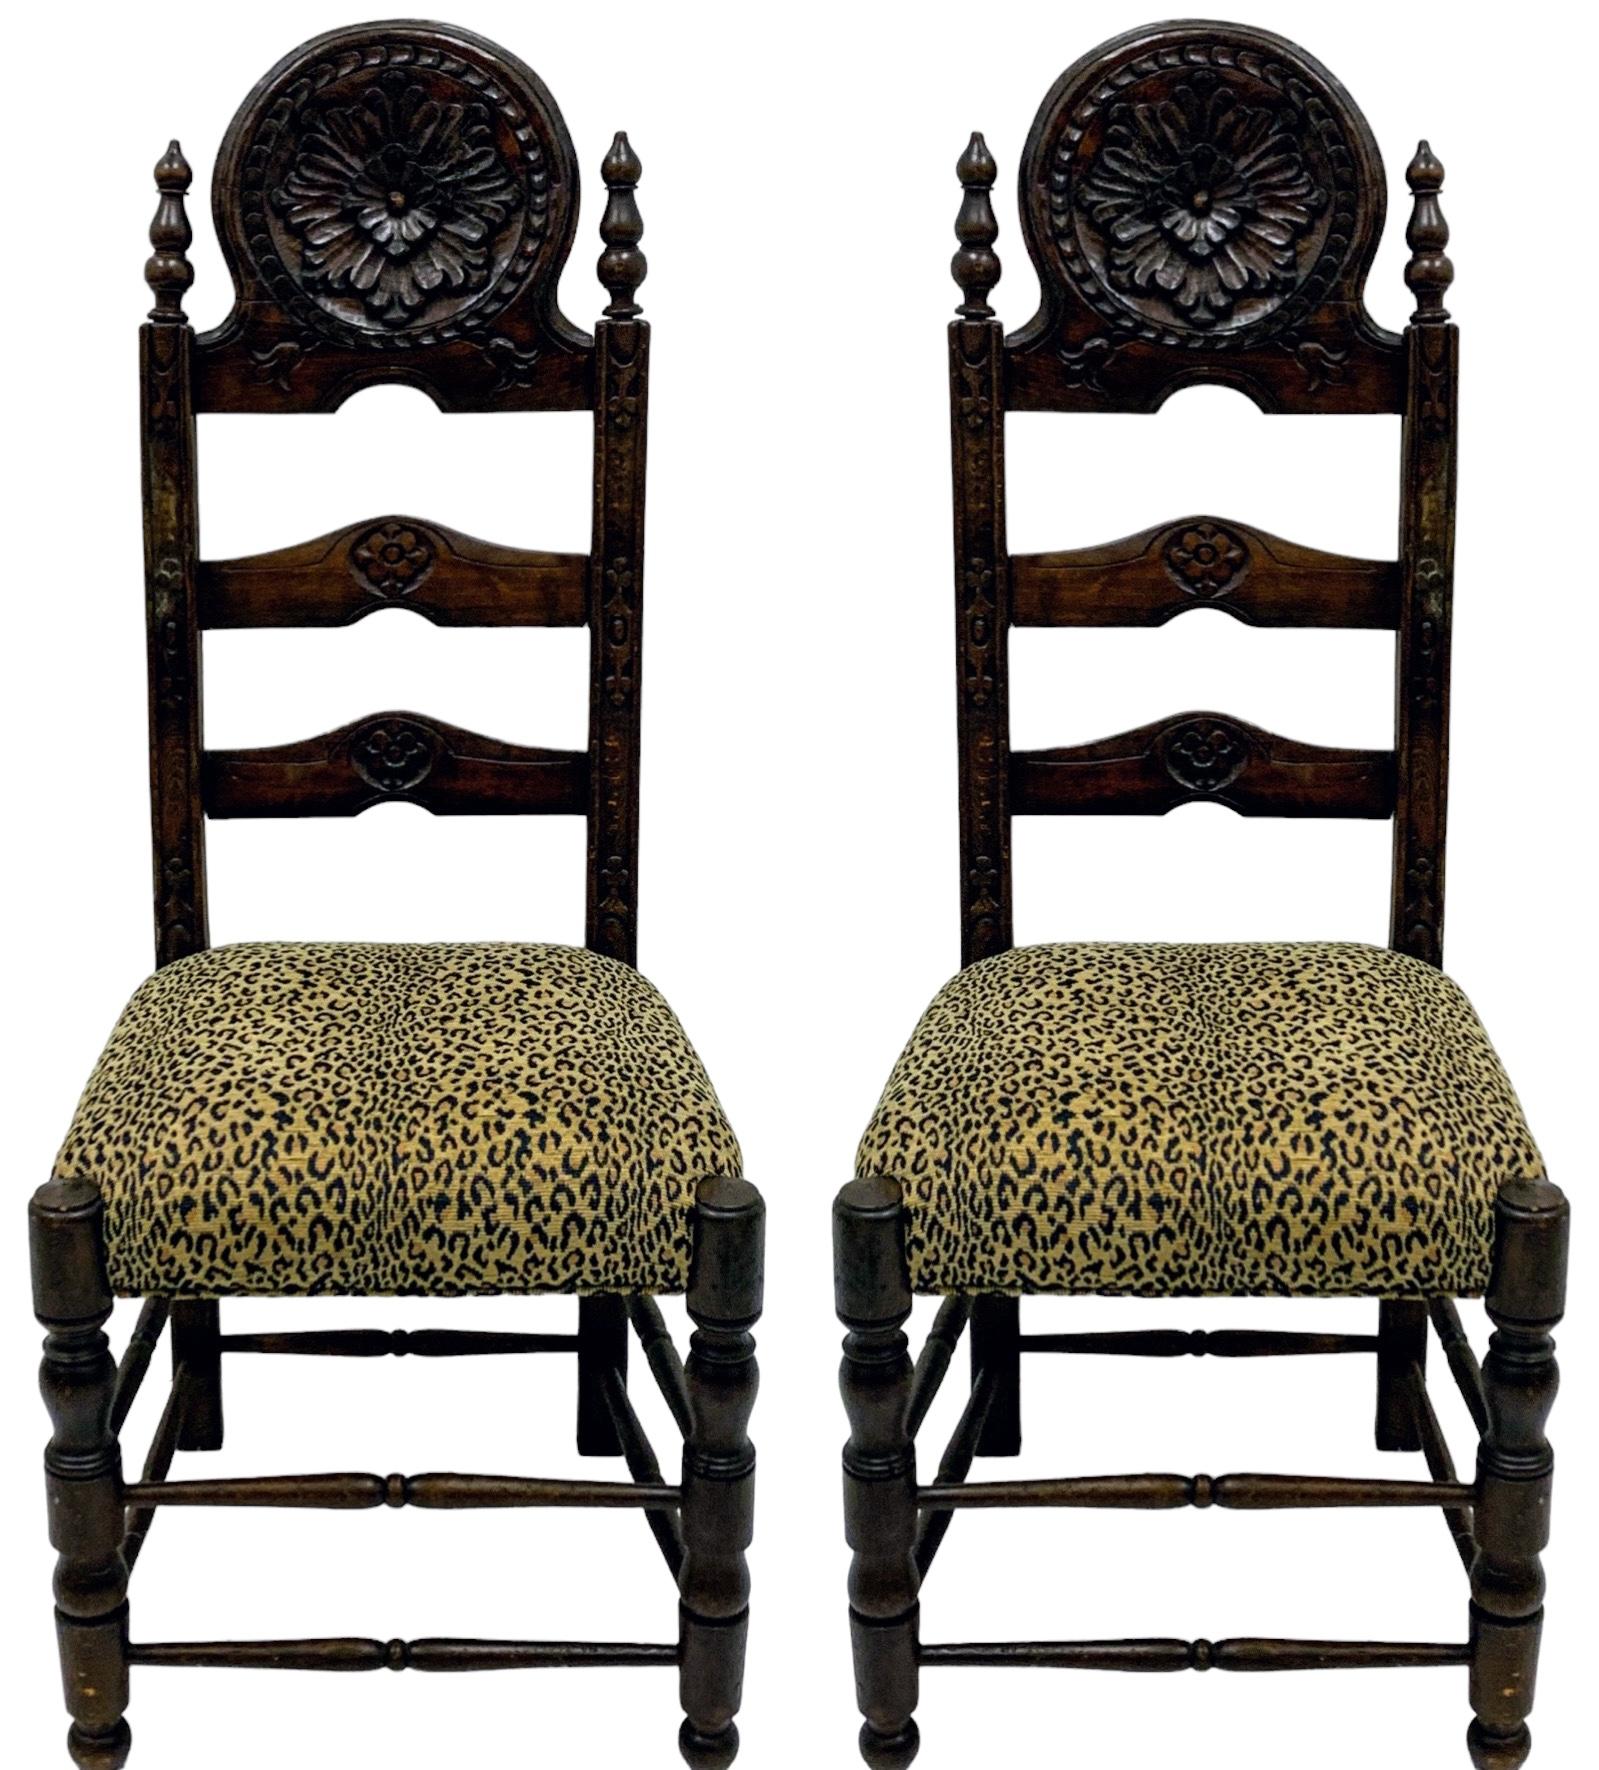 19th Century 19th-C. French Carved Oak Ladder Back Side Chairs In Vintage Leopard - Pair For Sale